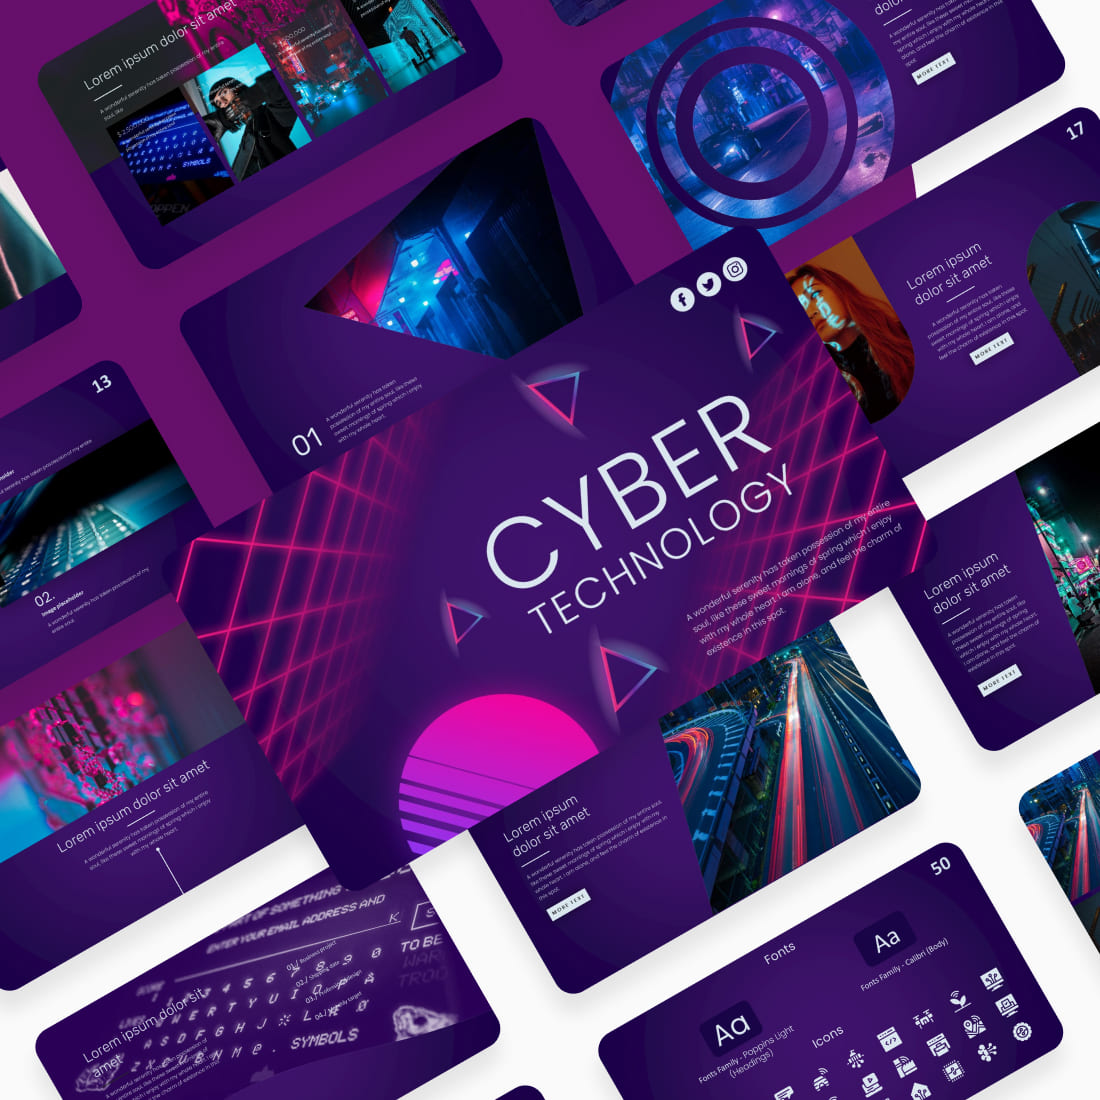 CyberTechnology Keynote Template cover image.